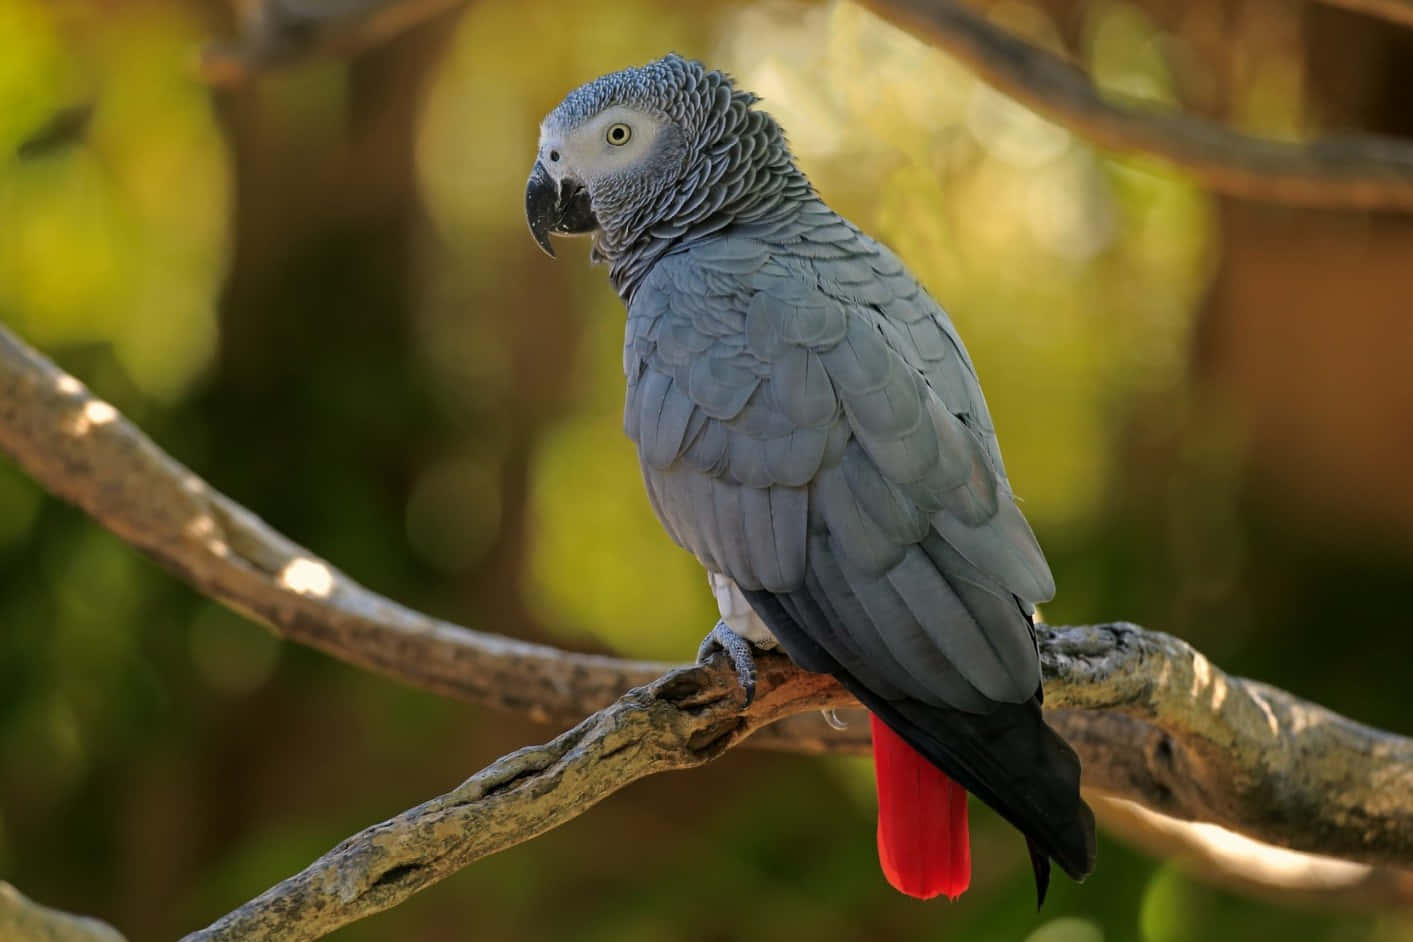 A colorful parrot perched on a branch.